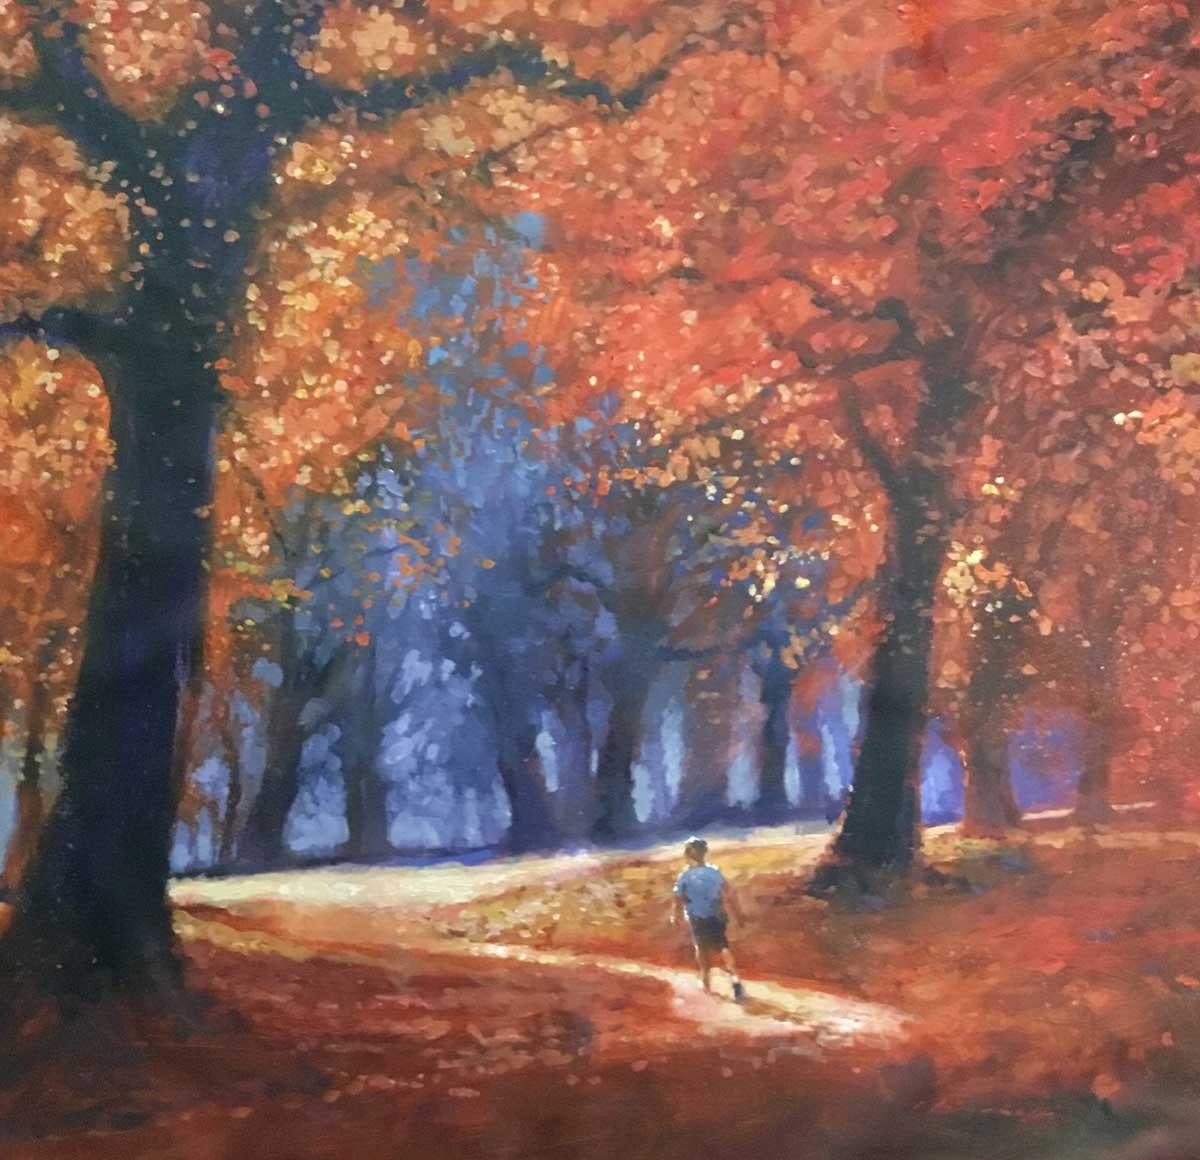 David Hinchliffe Landscape Painting - Walk in the Park - Autumn Colours: Oil Painting on Canvas